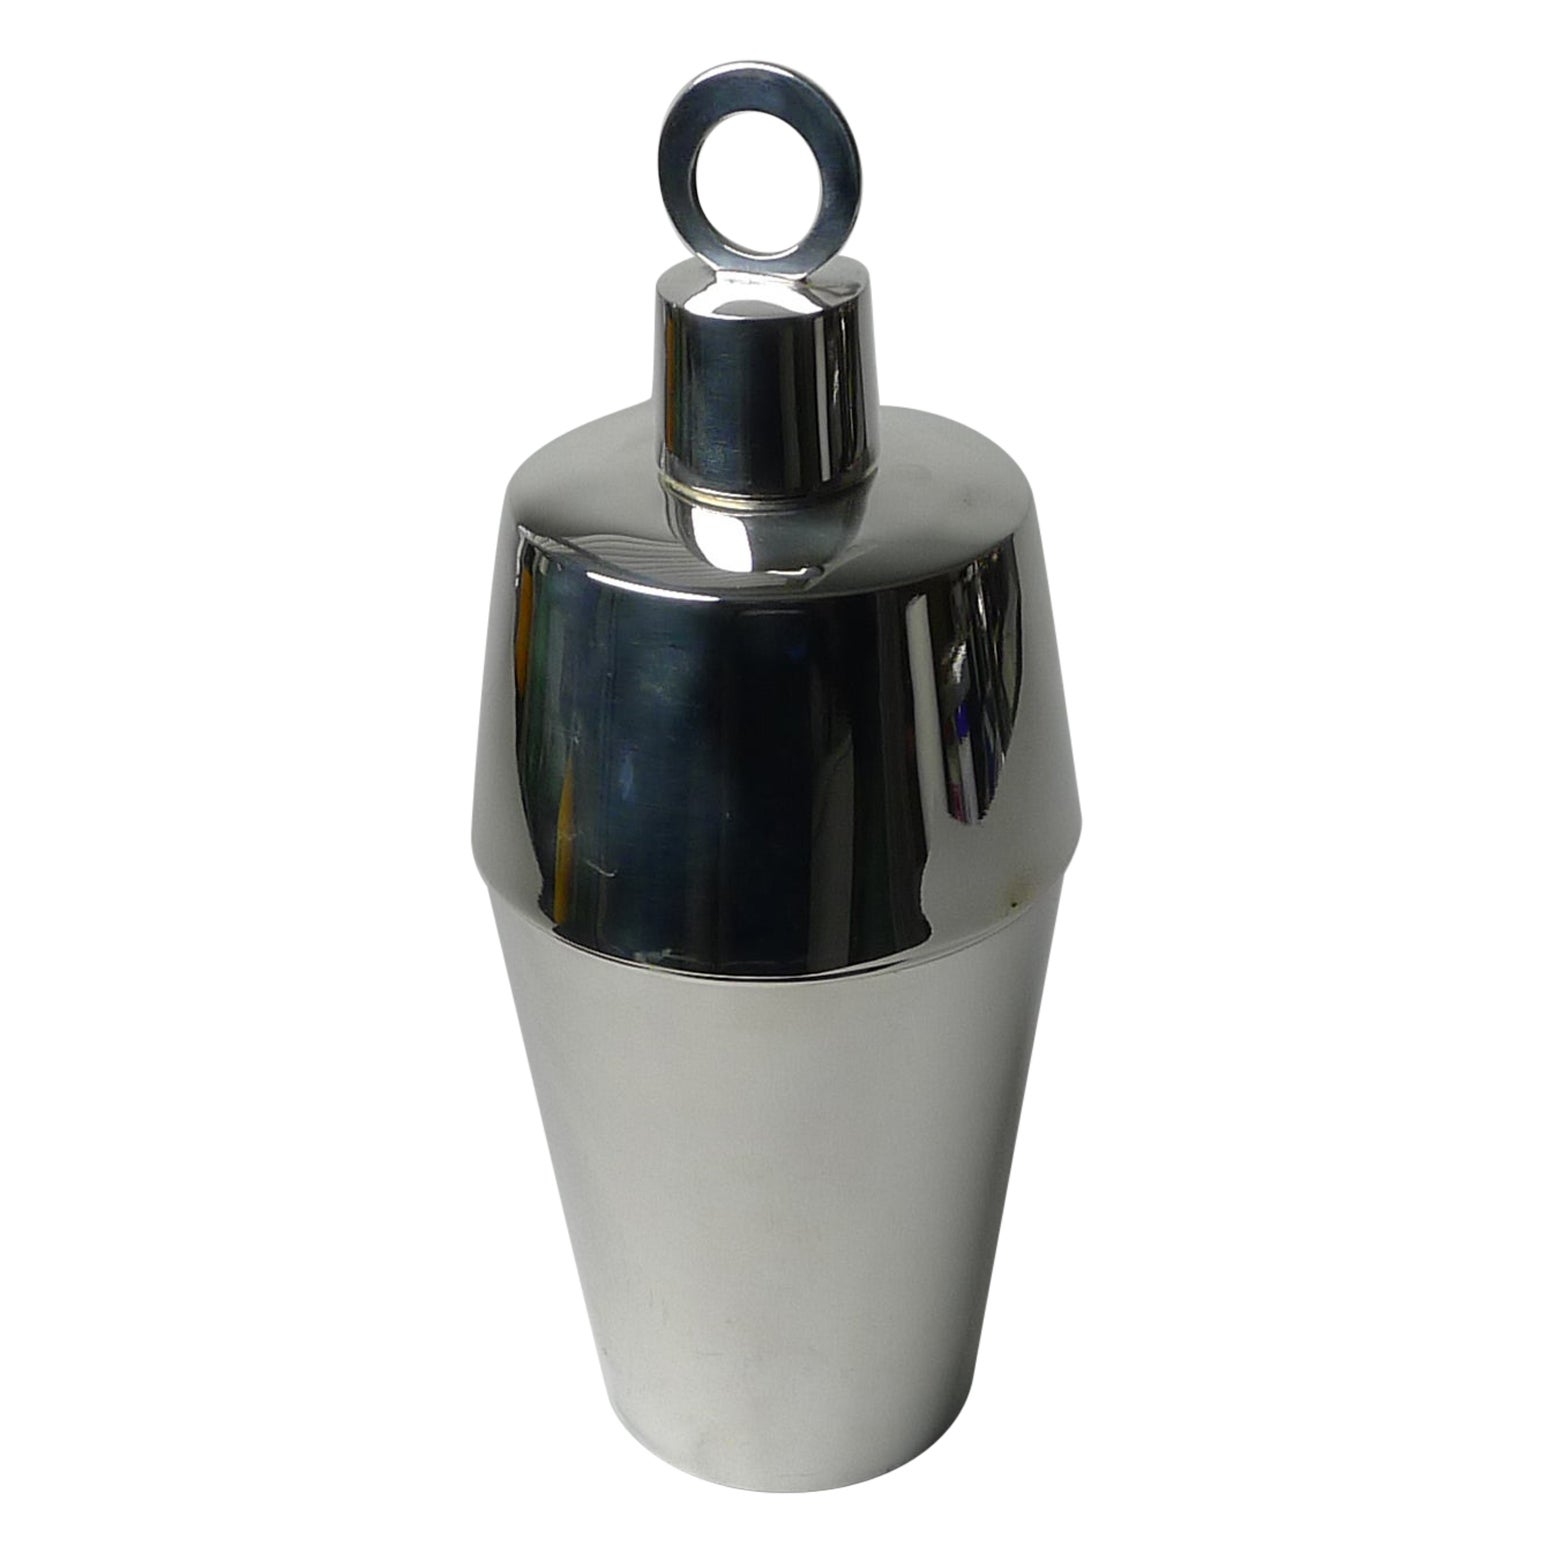 Stylish Art Deco Silver Plated Cocktail Shaker by William Hutton